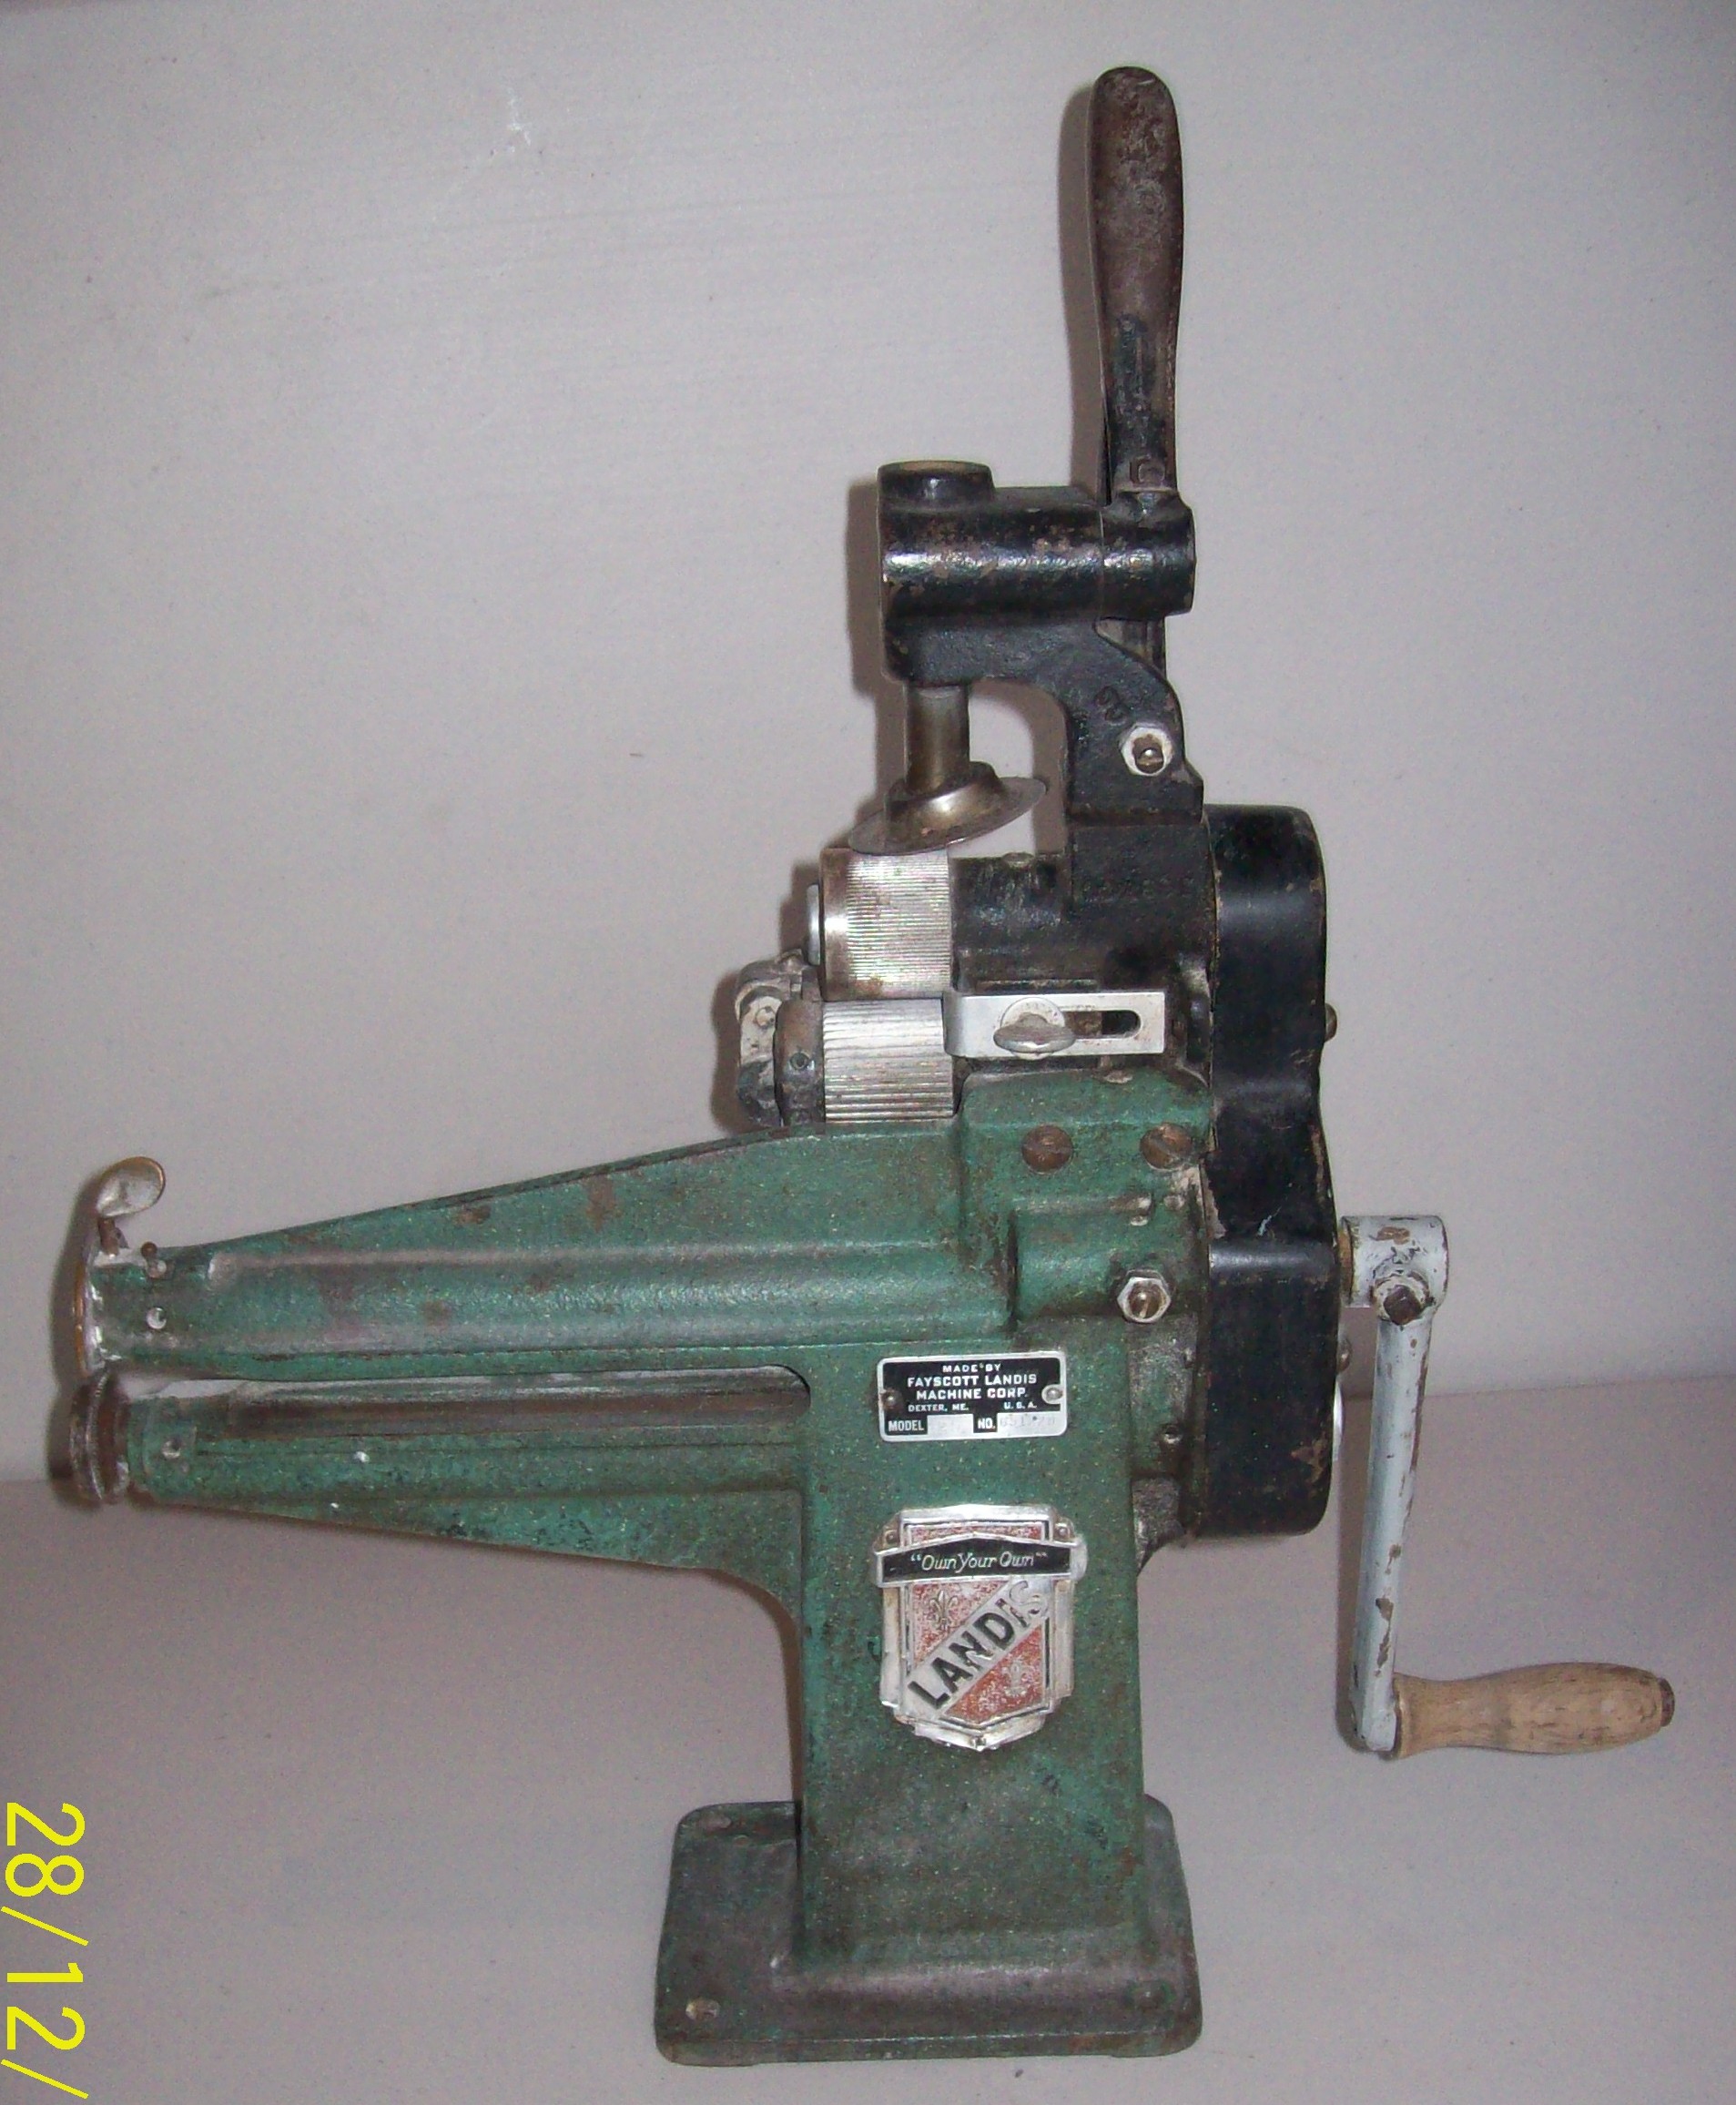 Closed Down Shoe Repair Shop Equipment For Sale - Used ...